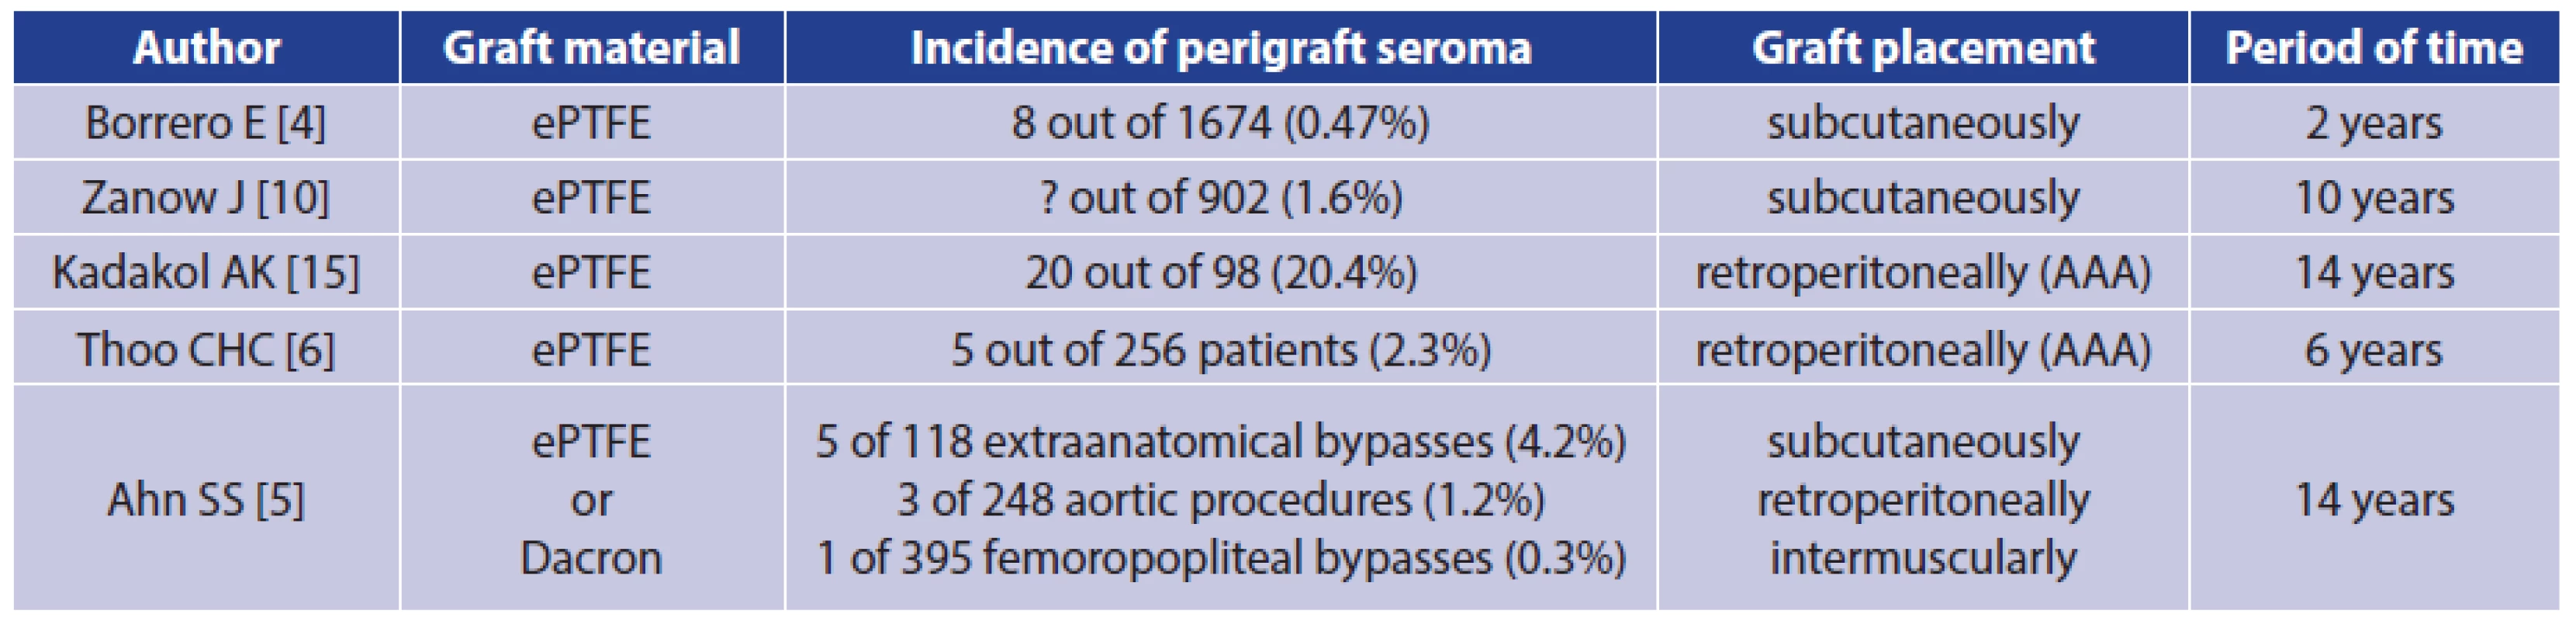 Incidence of perigraft seroma around Dacron and ePTFE grafts in selected studies